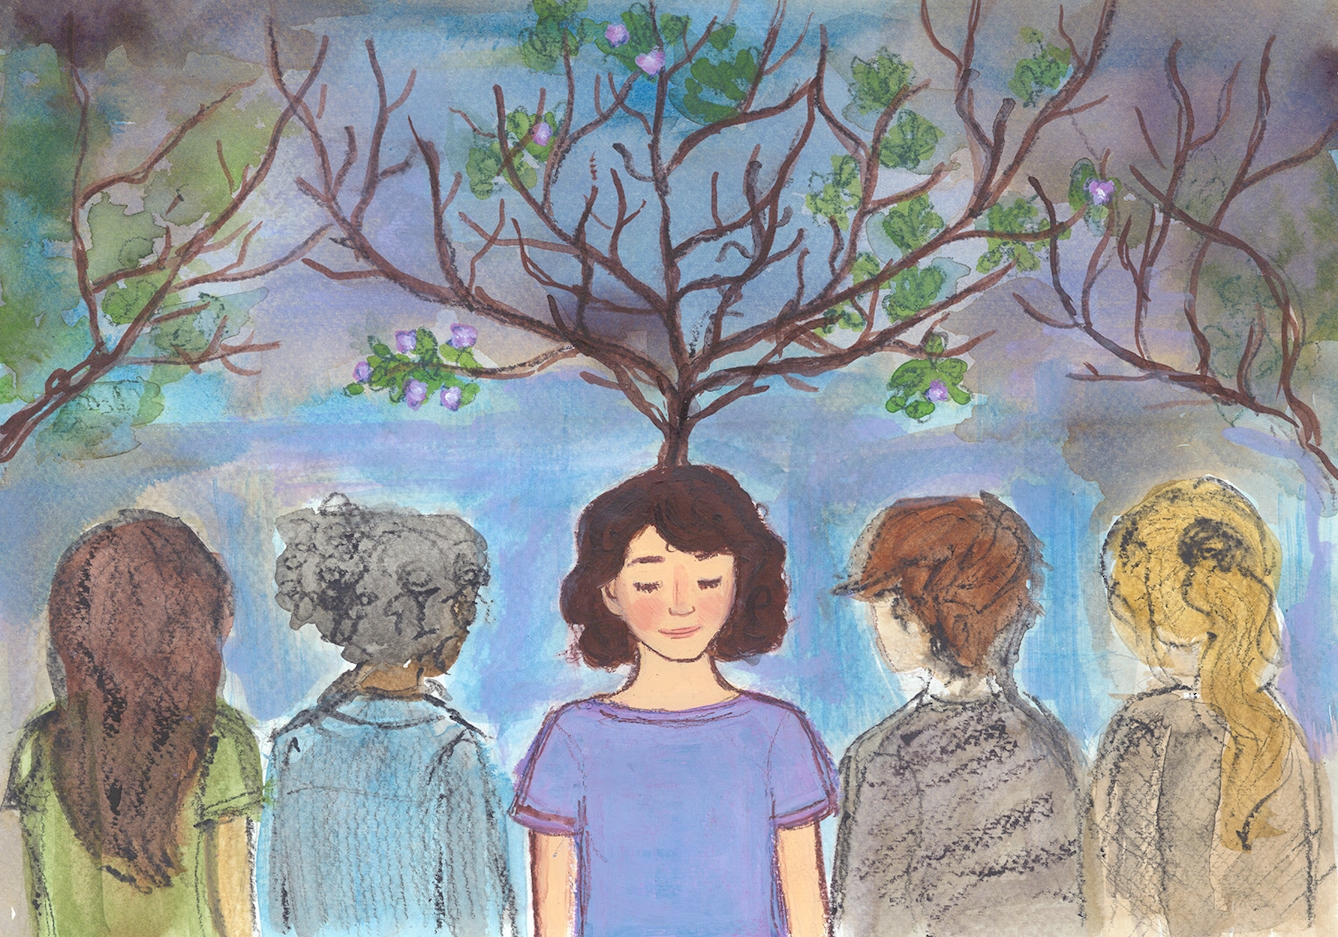 Photograph of a watercolour painting. There are five young women standing in a group. The girl in the middle has brown curly hair and is smiling calmly. There are long tree branches extending out of the girl's head. There are a few leaves and some pink flowers on some of the branches. The four other young women are facing the woman in the middle. 